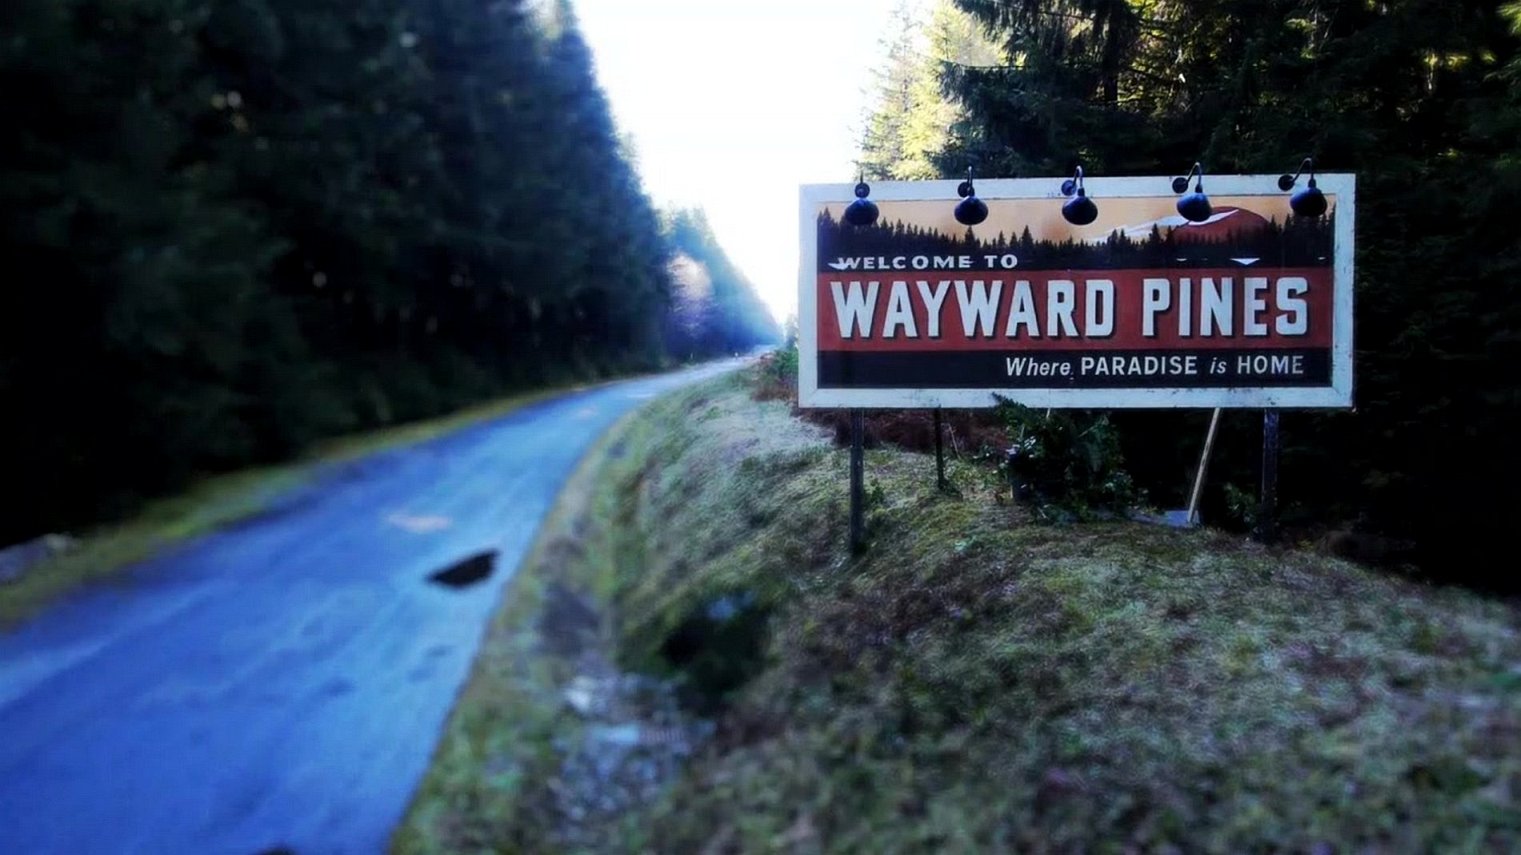 what time is Wayward Pines on